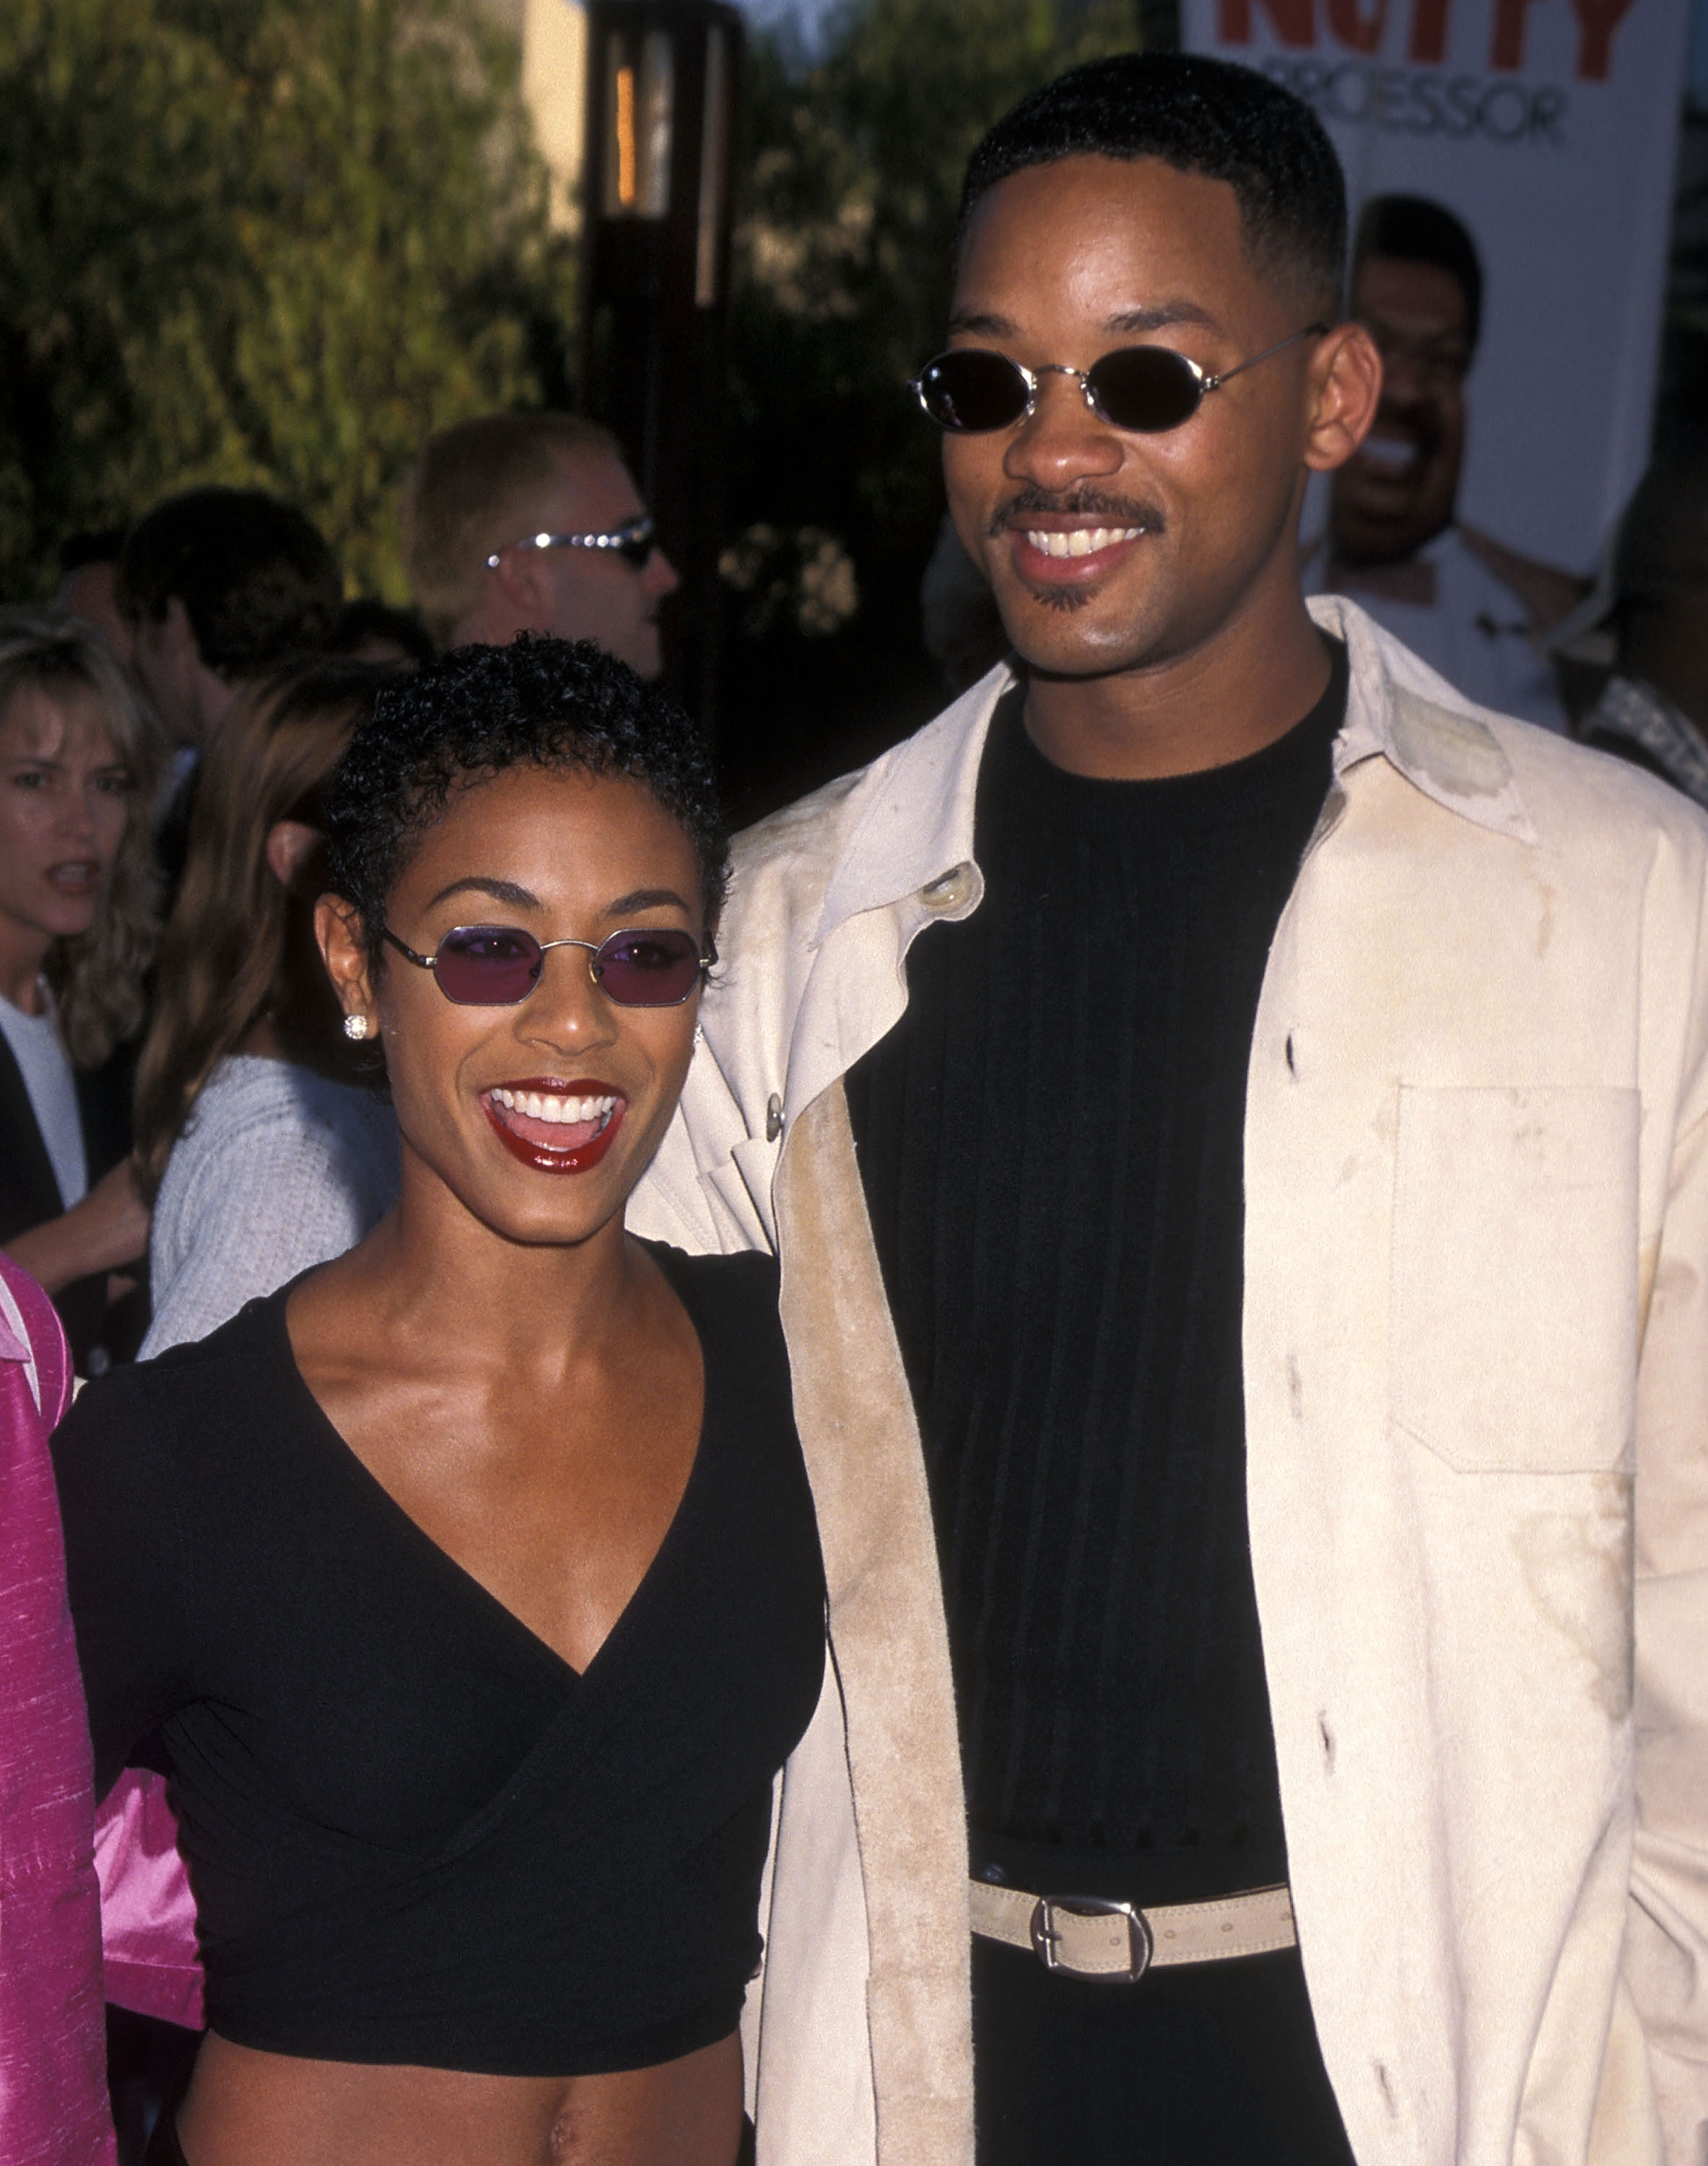 Jada Pinkett and Will Smith attending the premiere for "The Nutty Professor" in Universal City, California on June 27, 1996 | Source: Getty Images